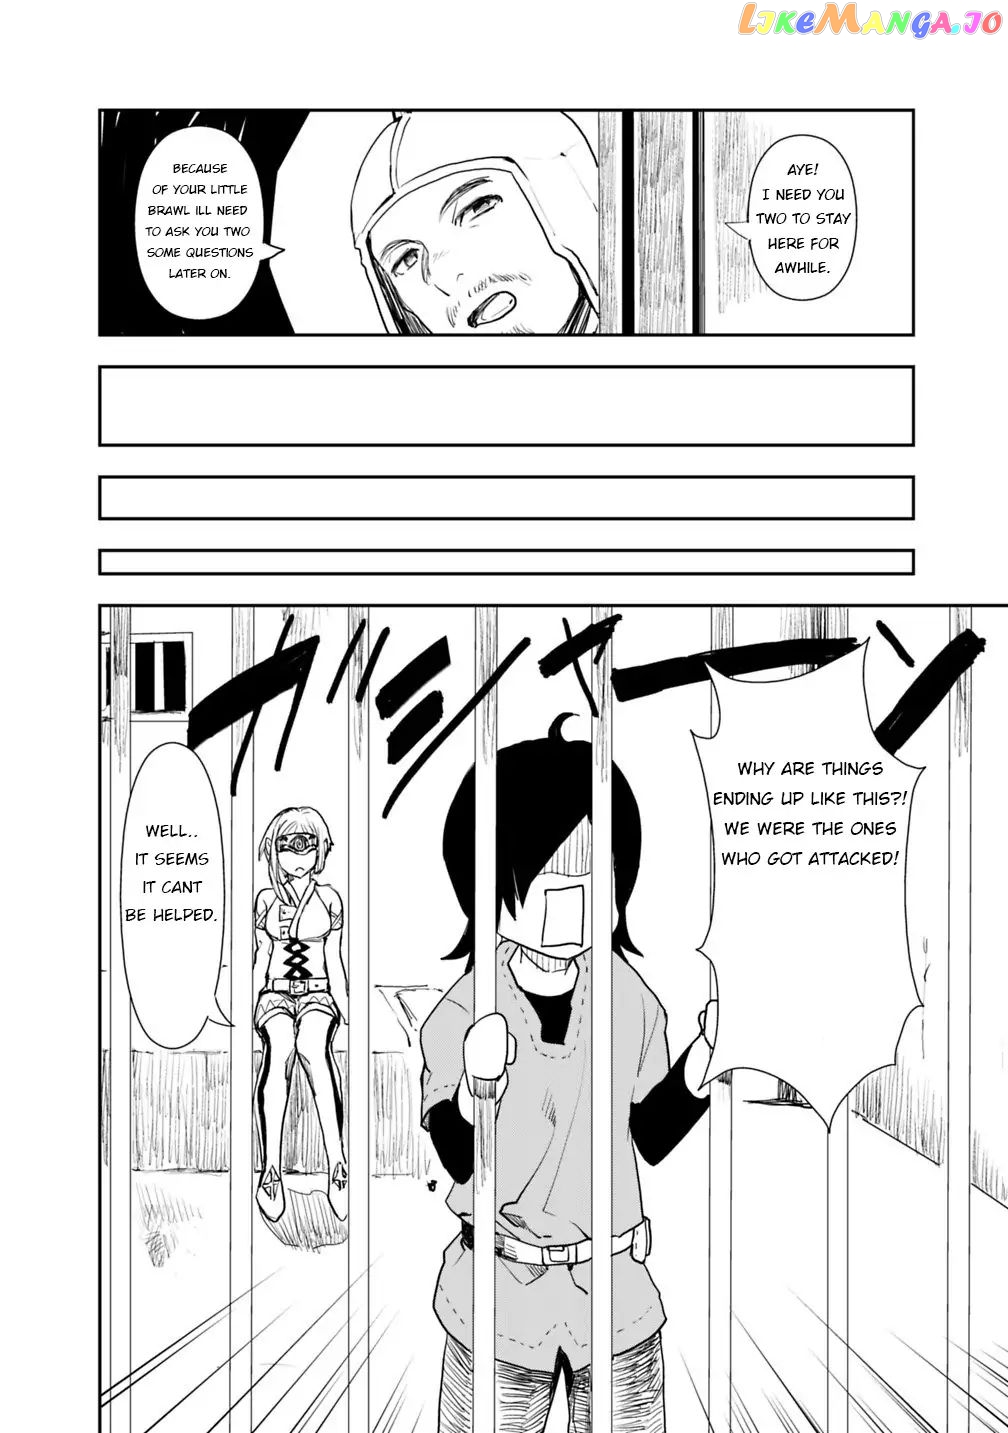 I Came To Another World As A Jack Of All Trades And A Master Of None To Journey While Relying On Quickness chapter 2.2 - page 10